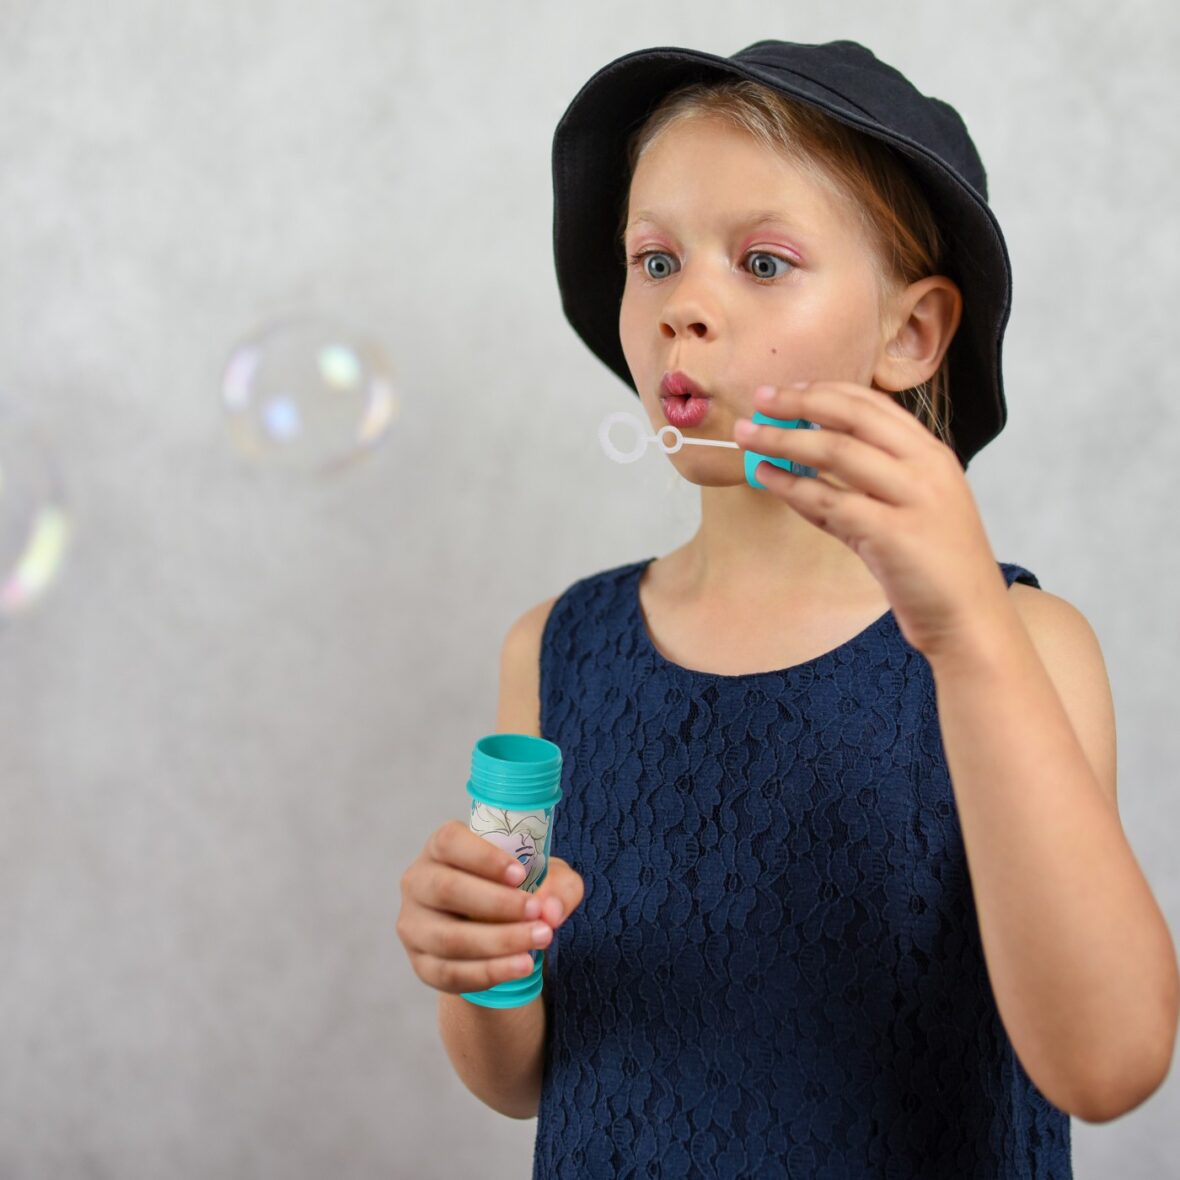 Young girl in a hat and dress blows bubbles